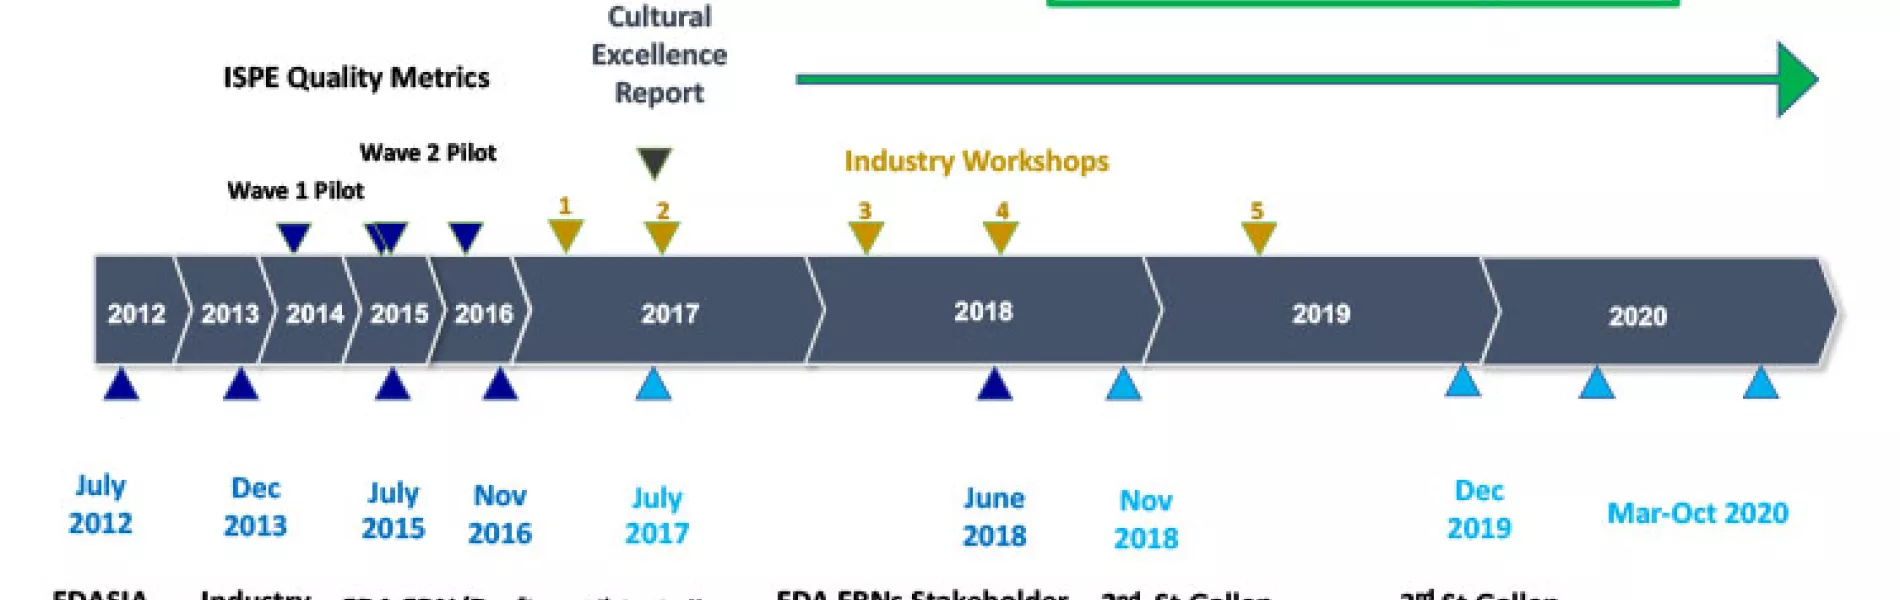 Figure 4: The ISPE Quality Metrics Initiative/APQ timeline. Key: FDASIA, Food and Drug Safety and Innovation Act; FRN, Federal Register notice.